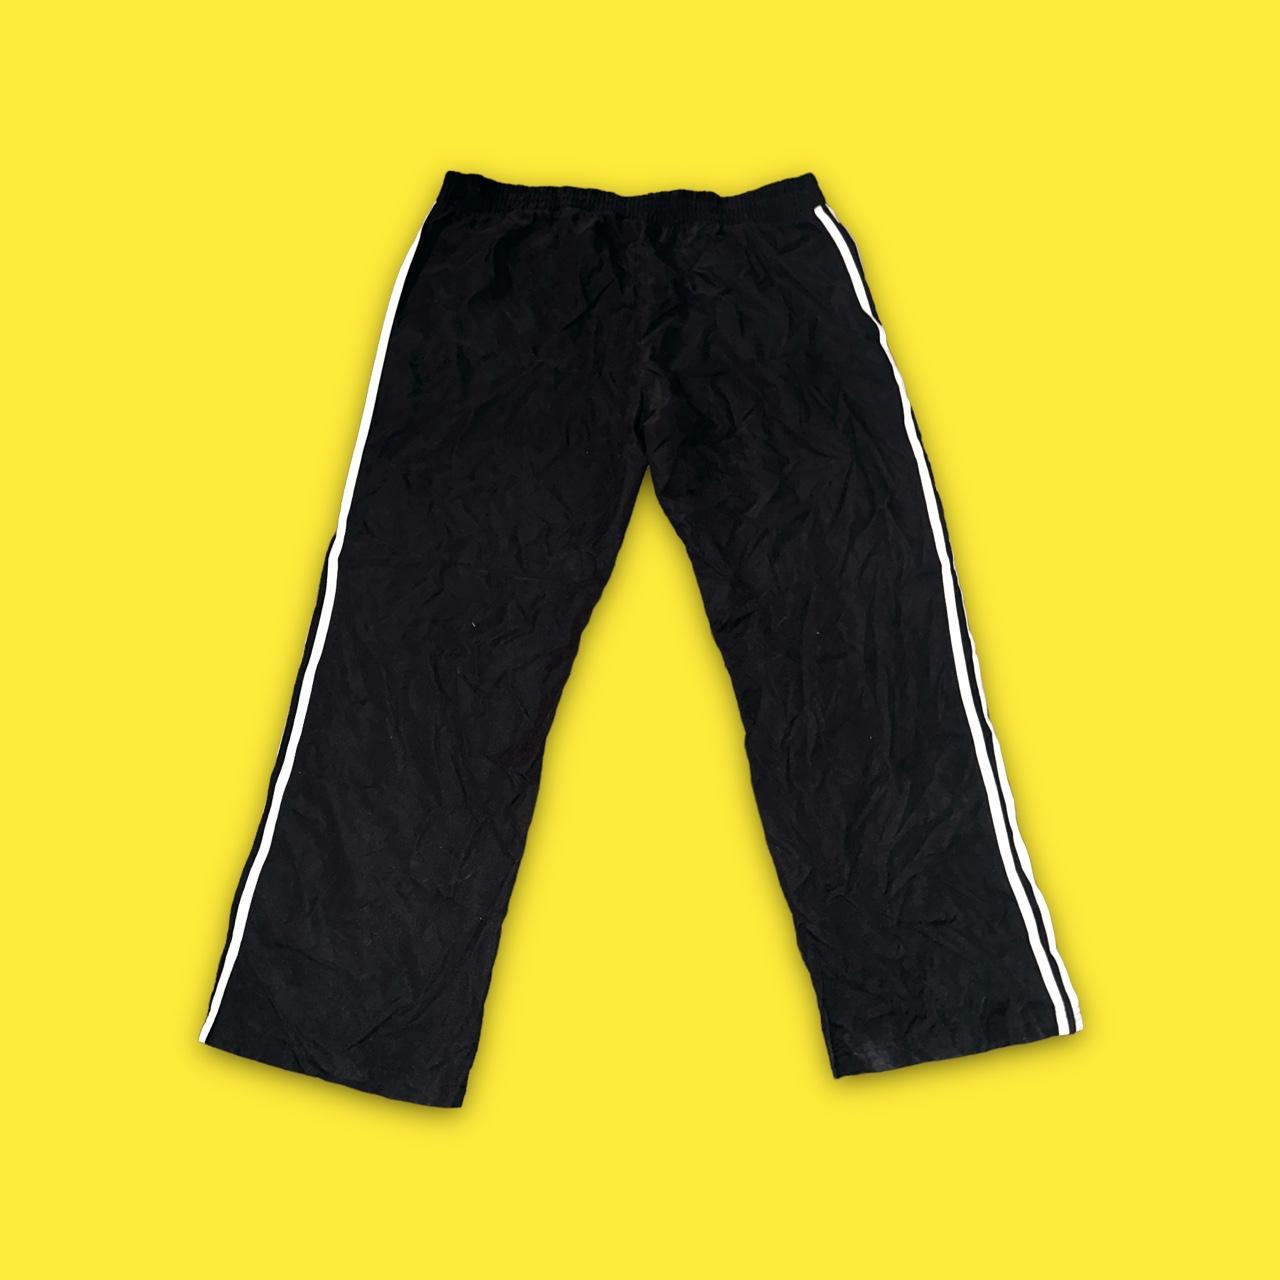 Adidas Men's Black and White Joggers-tracksuits (3)